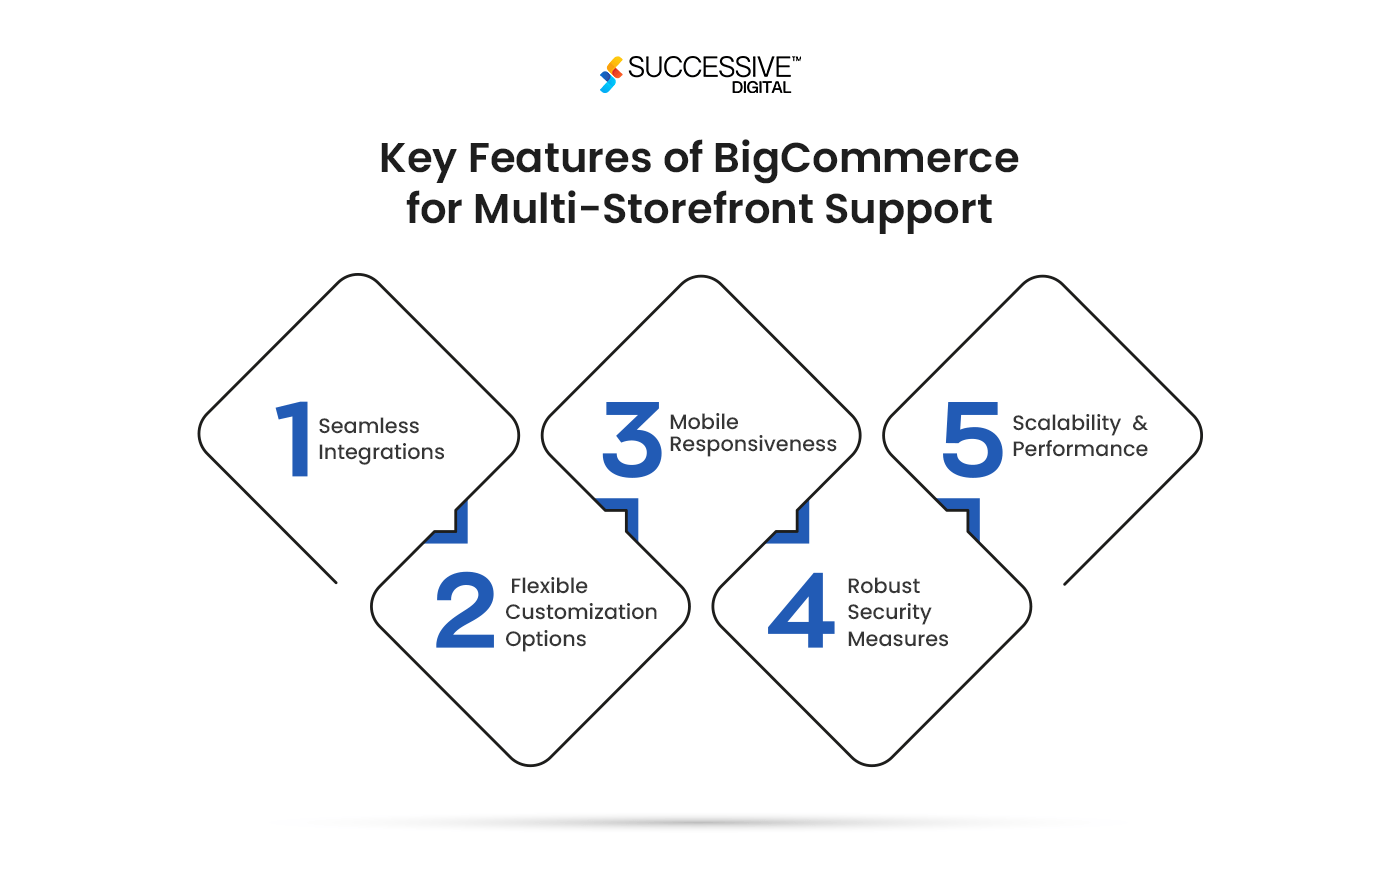 Key Features of BigCommerce for Multi-Storefront Support